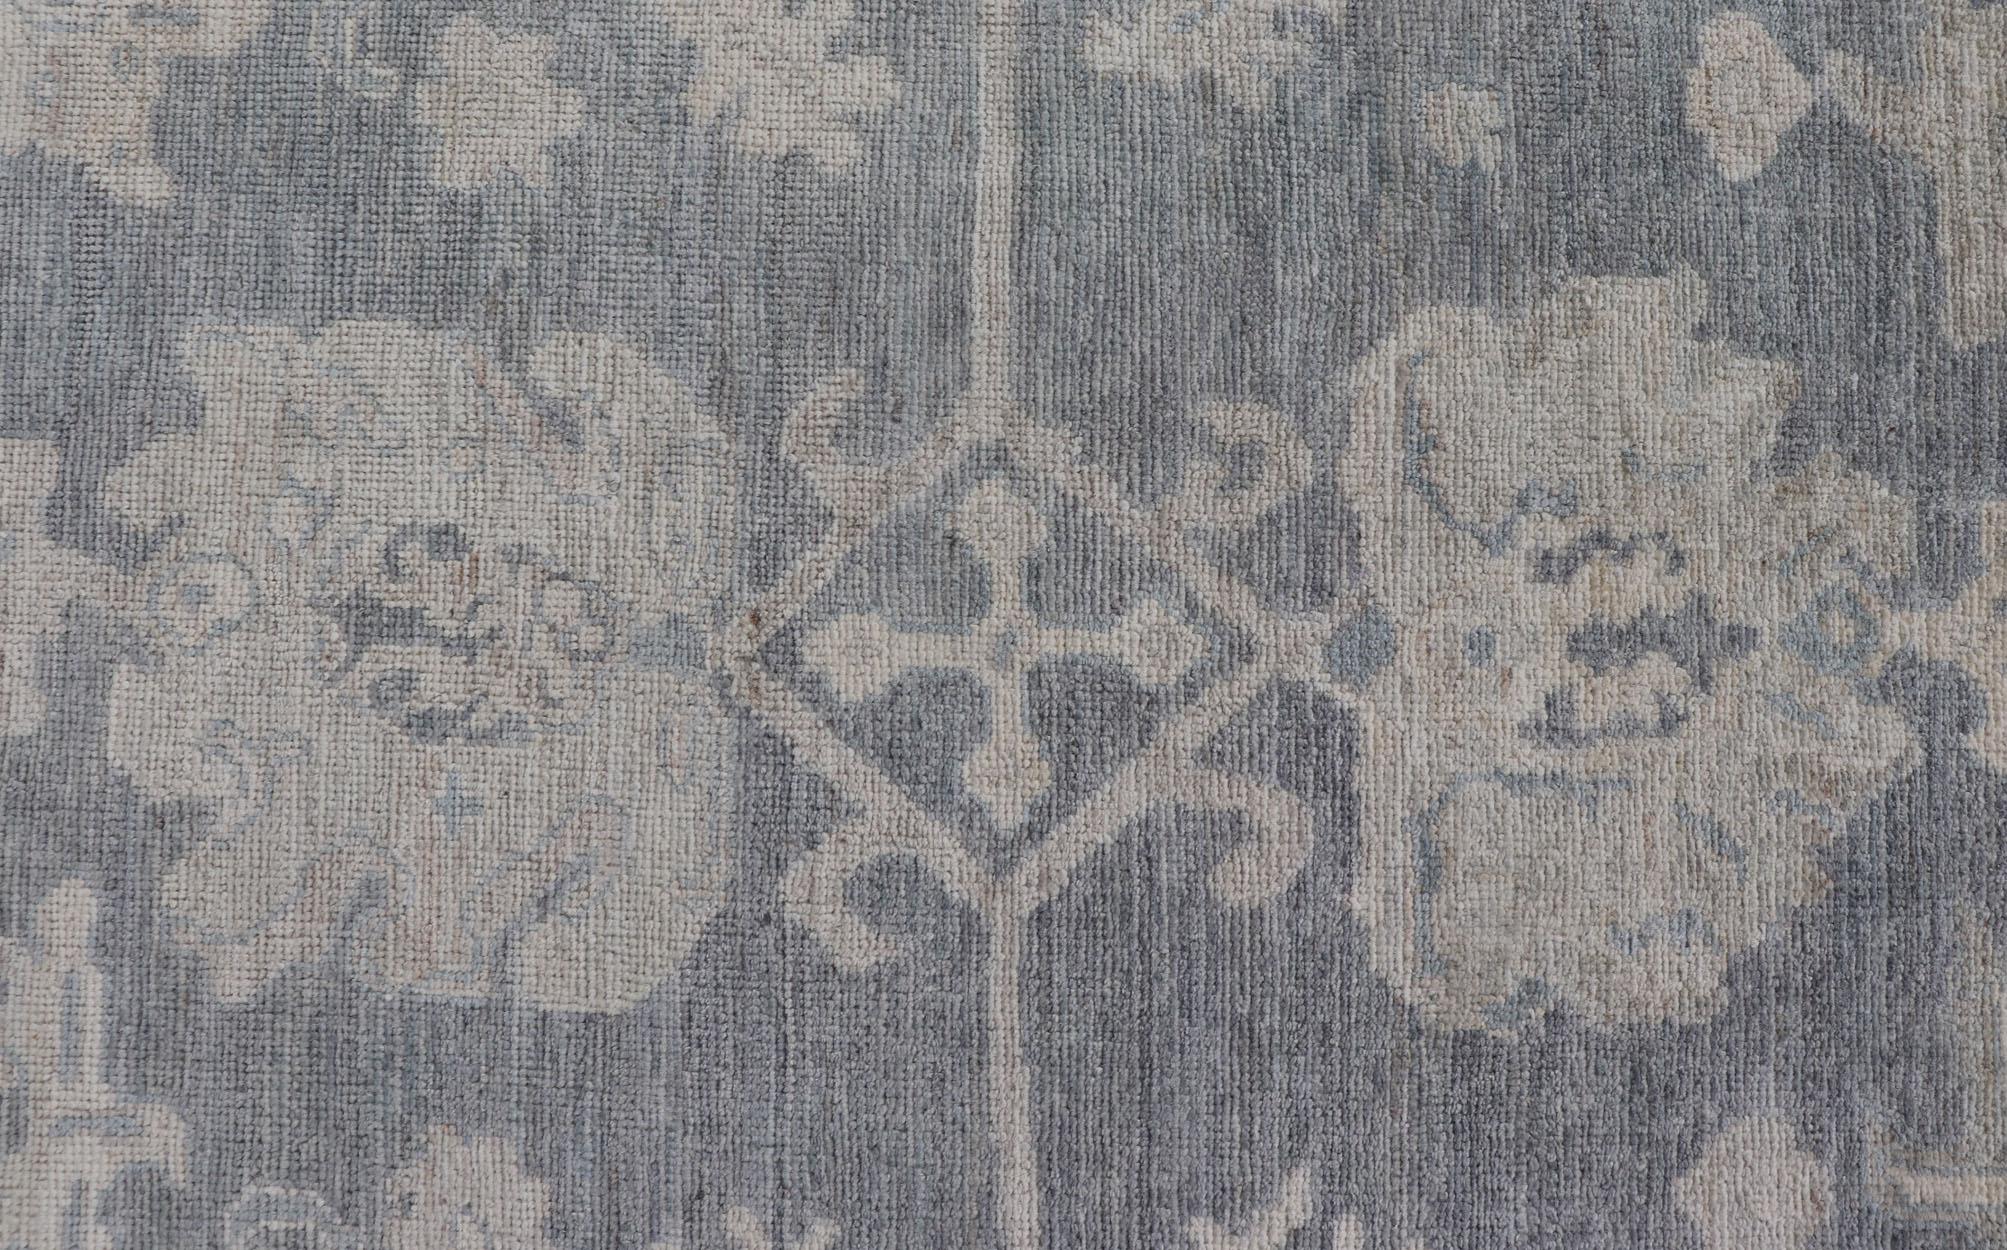 Hand-Knotted Modern Oushak with Large Floral Motifs with Cream, Blue, and Steel Blue For Sale